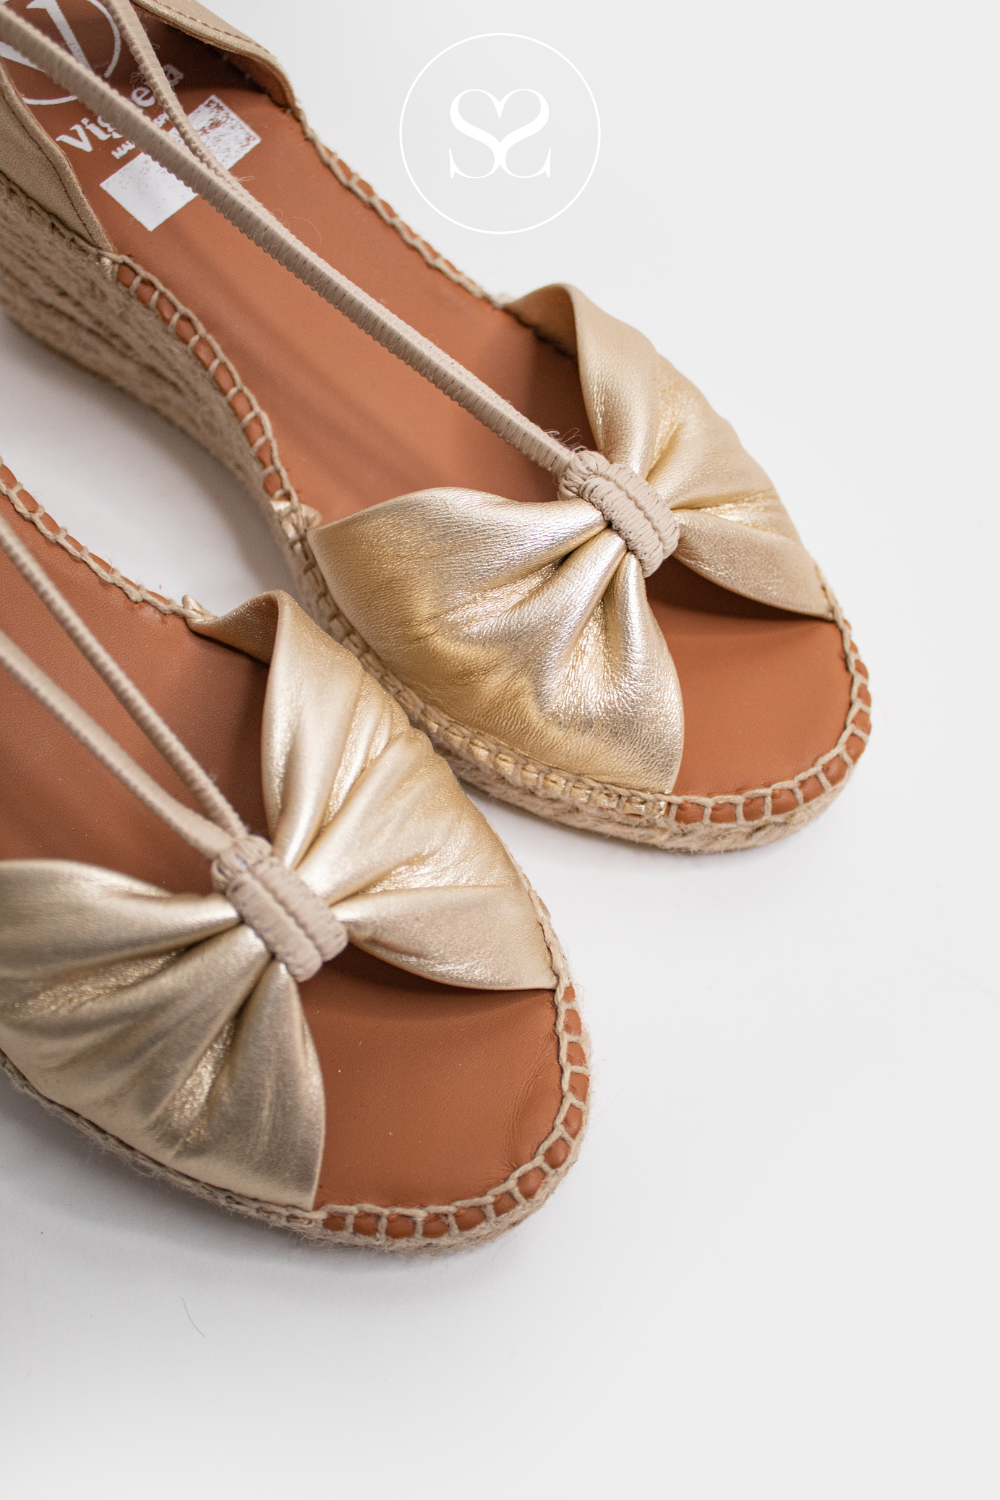 VIGUERA 1909 GOLD LEATHER ESPADRILLE WEDGE SANDALS WITH BOW FRONT AND ELASTICATED V-CUT STRAPS